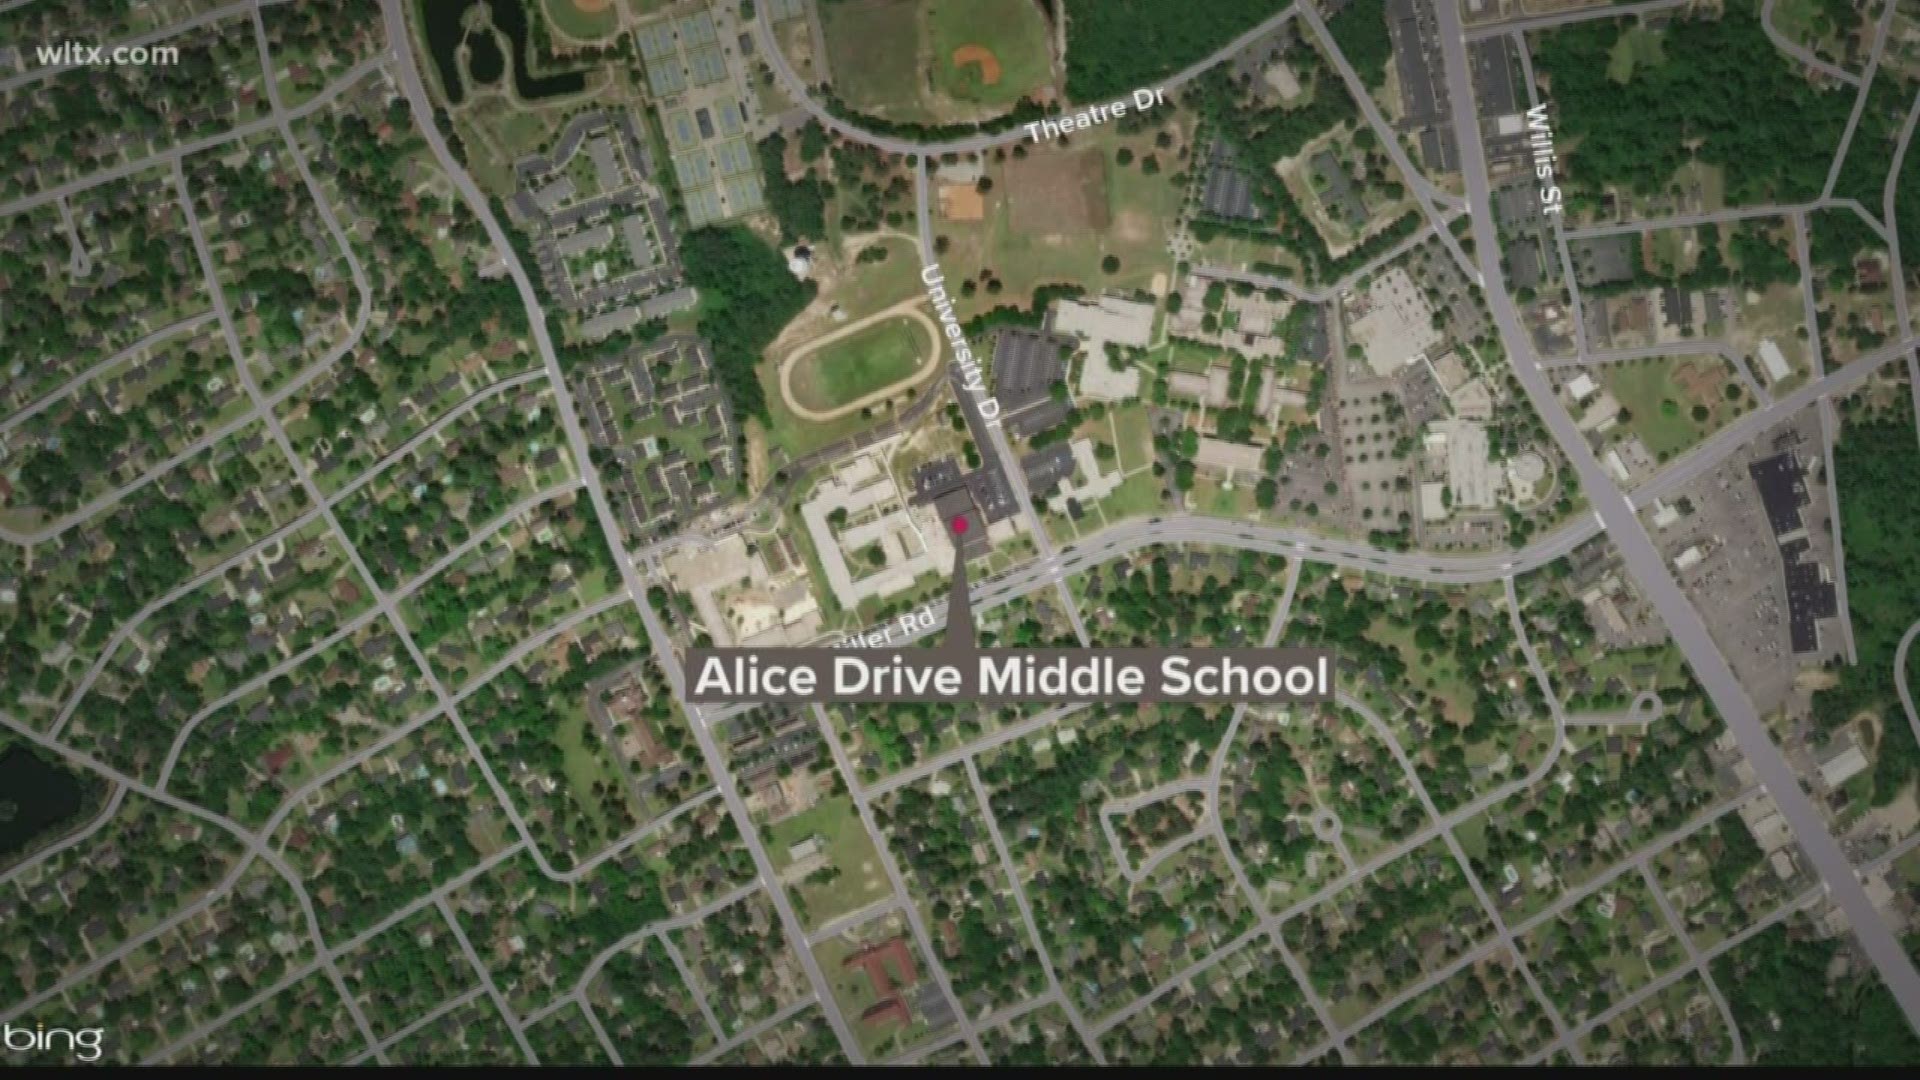 A student at Alice Drive Middle School in Sumter was found with a loaded gun in his backpack, police say.